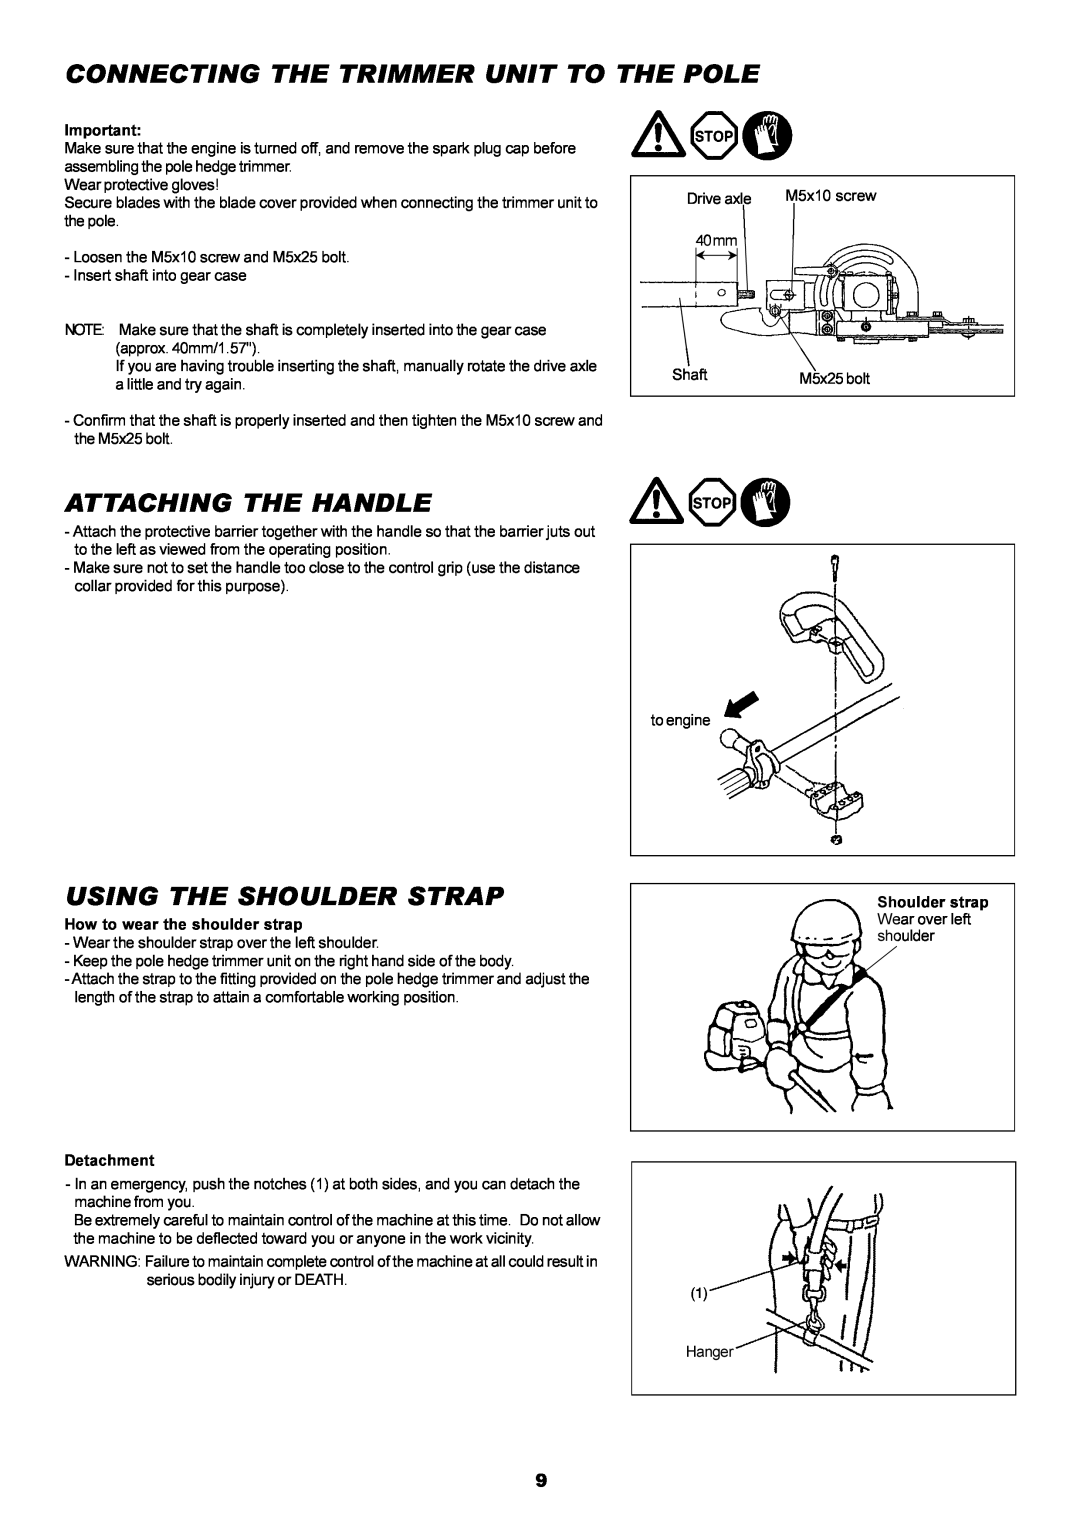 Dolmar MH-2556 instruction manual Connecting The Trimmer Unit To The Pole, Attaching The Handle, Using The Shoulder Strap 